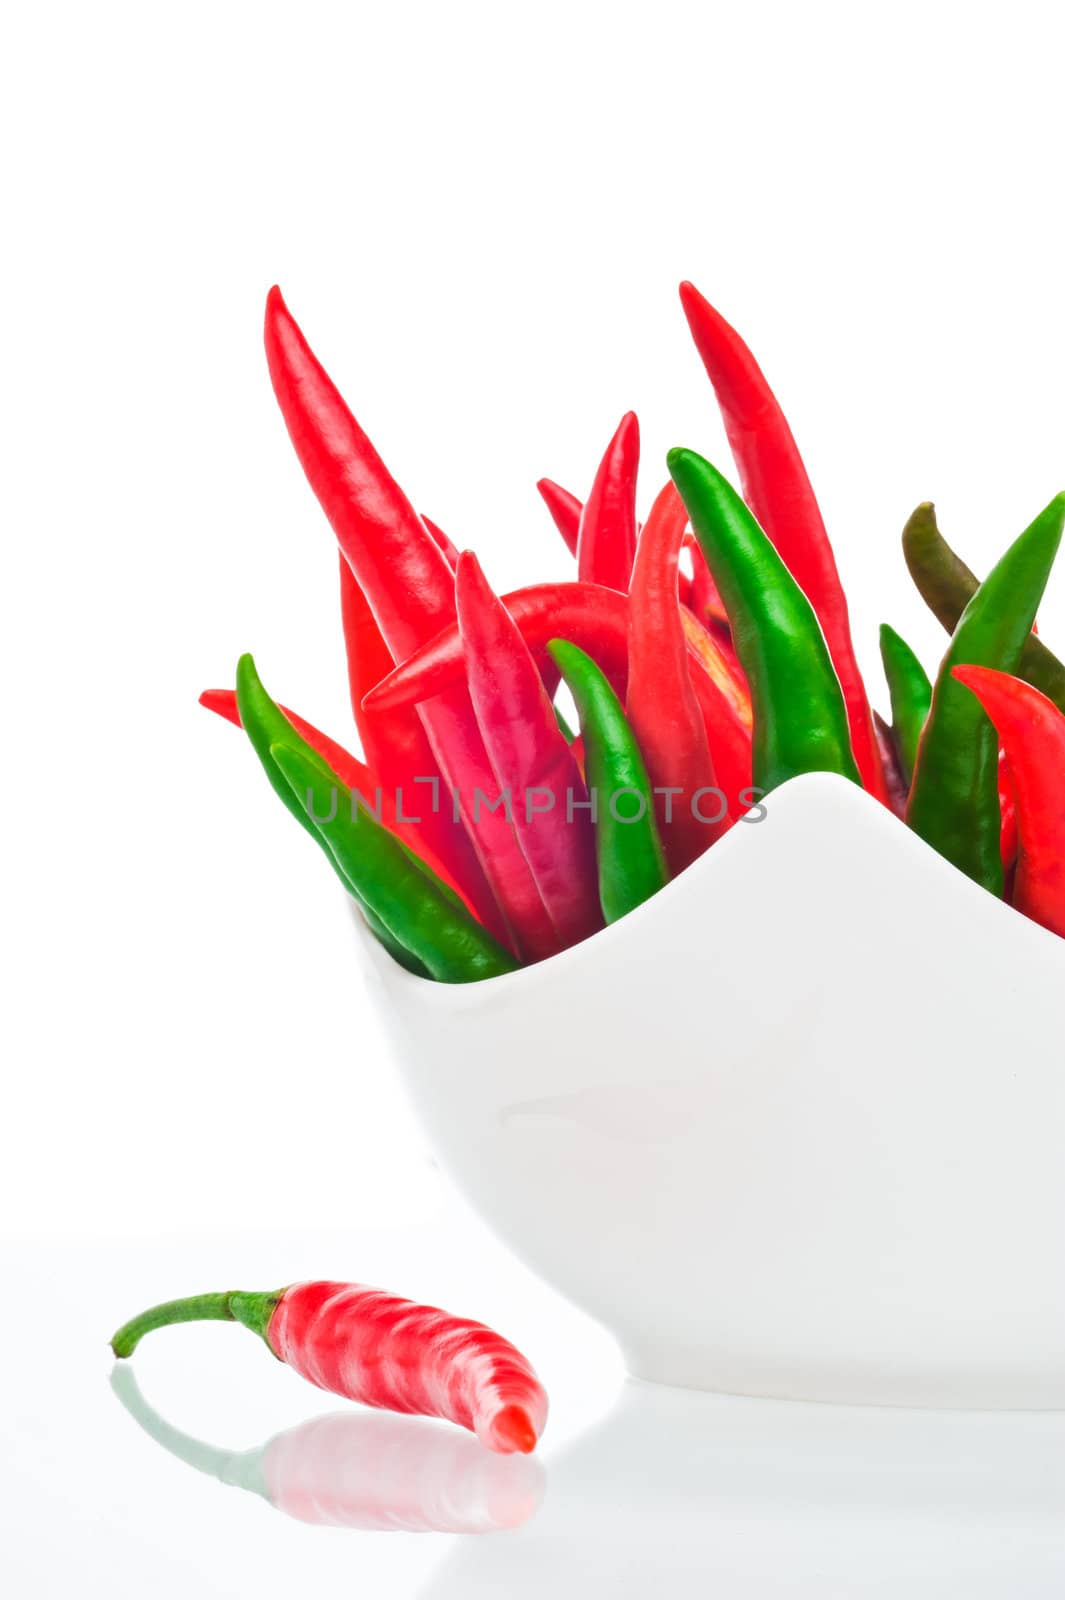 Chili in a bowl on a white background by p.studio66